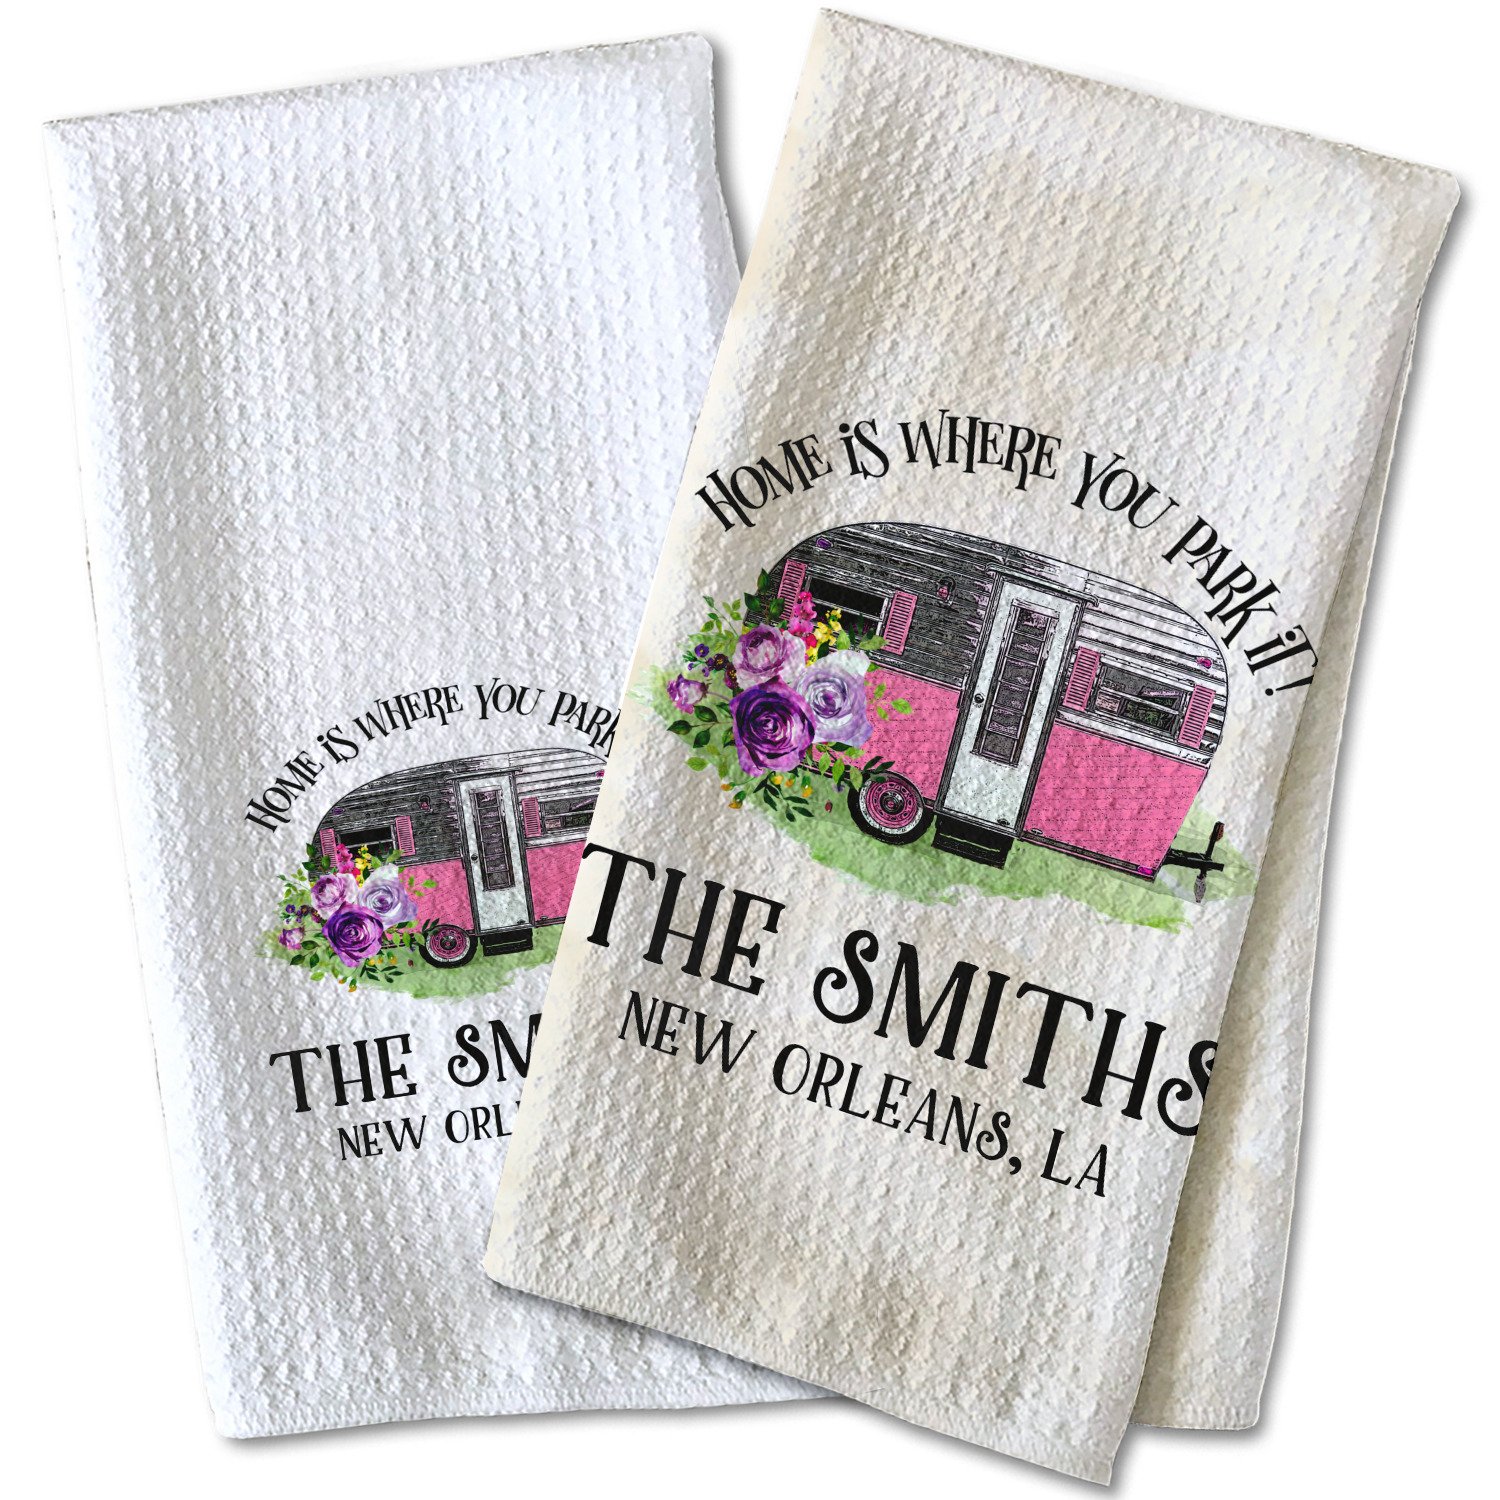 Travel Trailer Gift Camper Decor Personalized Home Sweet Camper Waffle Weave Dish Towel Personalized Kitchen Towel Camper Accessories Personalized Dish Towel 